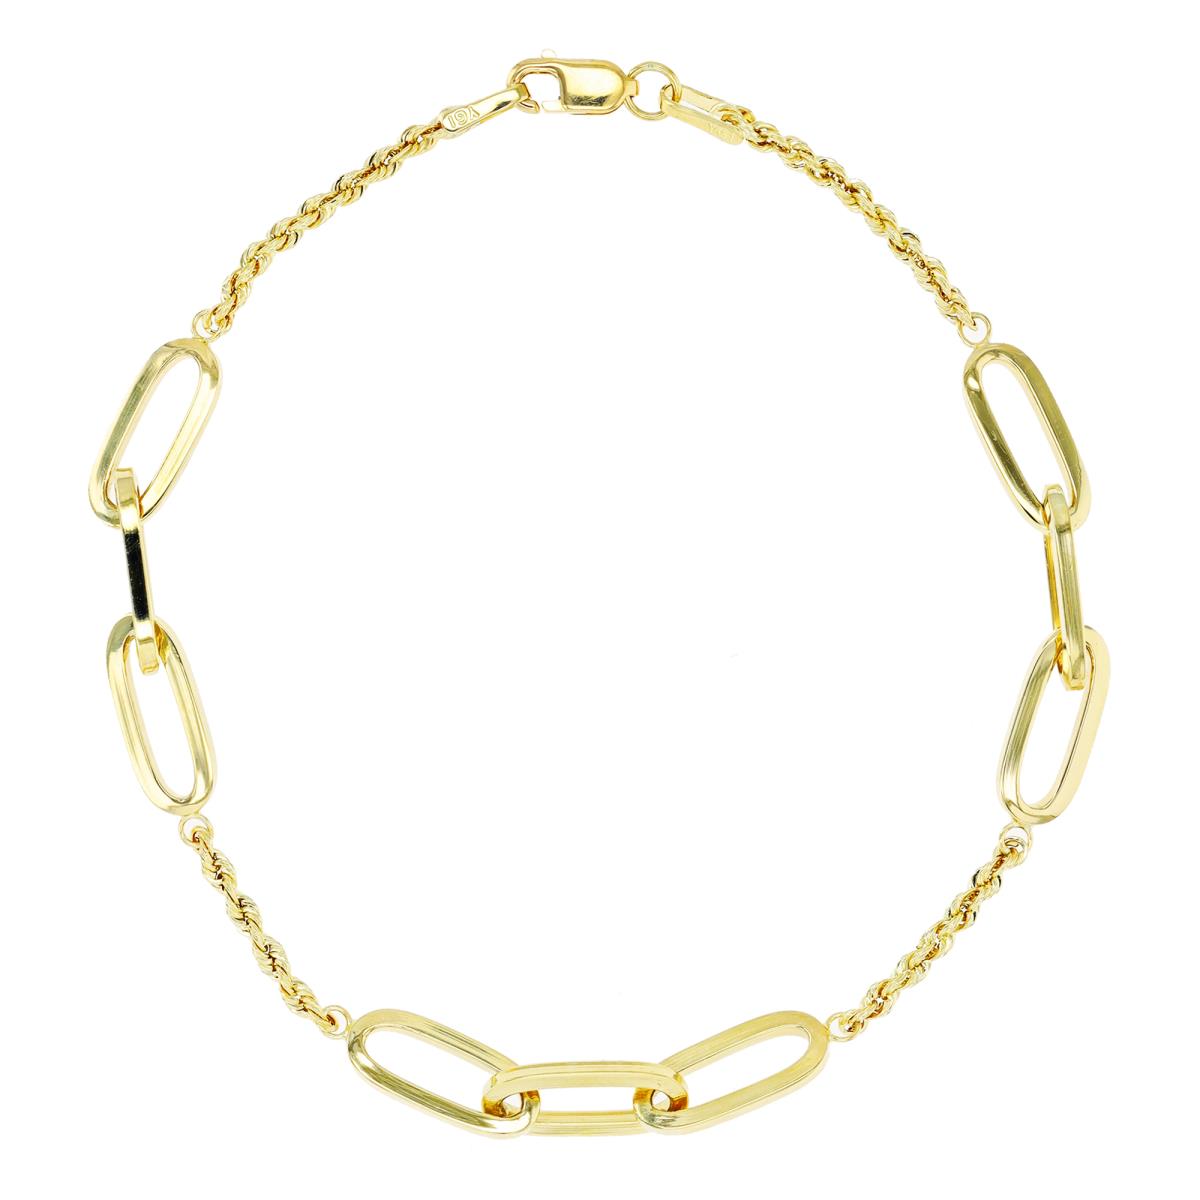 10K Yellow Gold 2.50mm-5.00mm Rope and Paper Clip 7.25" Chain Bracelet